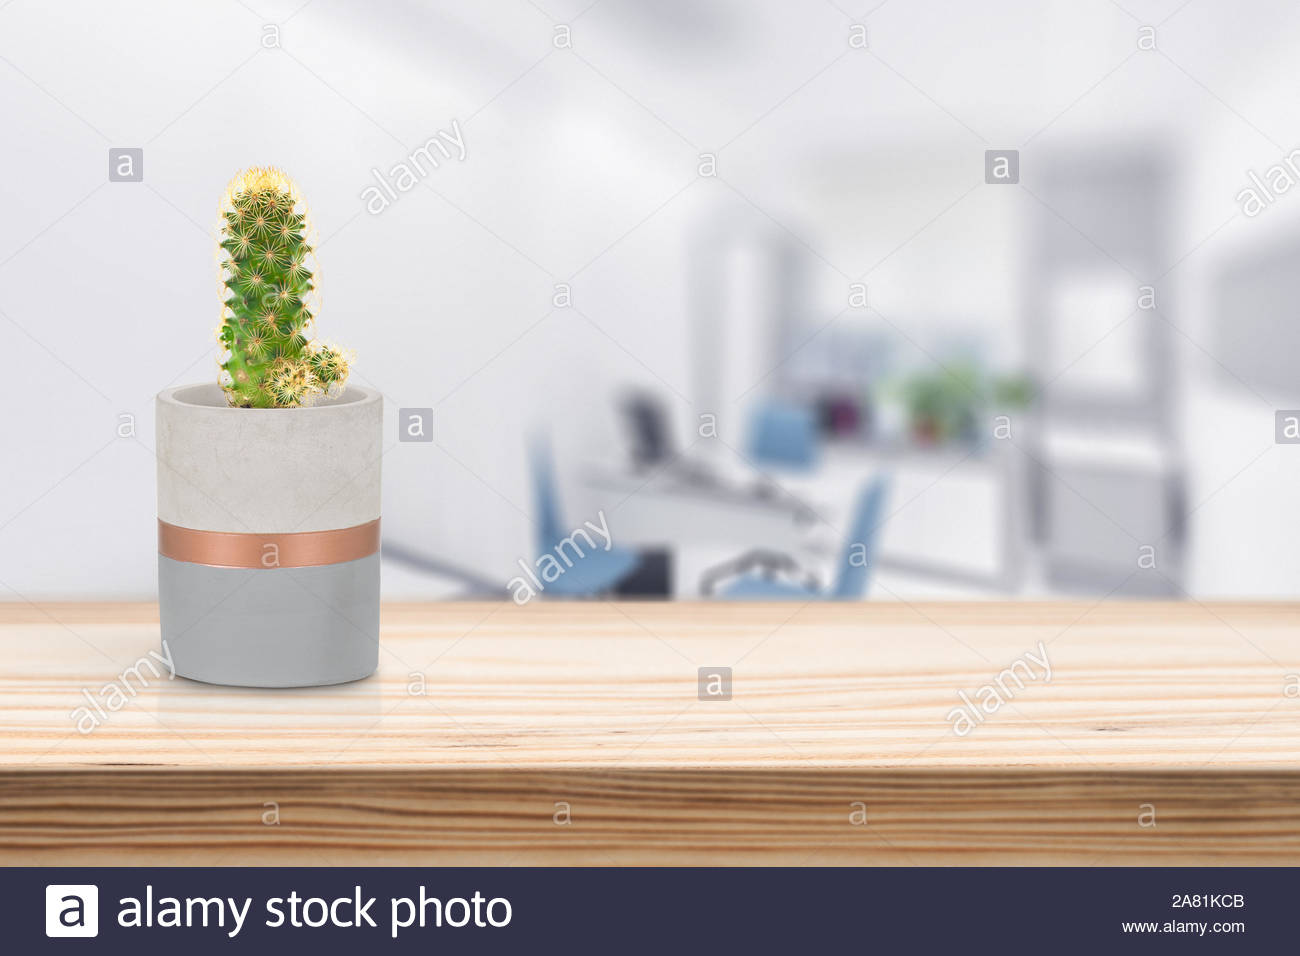 cement vase with cactus on vase pot on table in living room 2A81KCB